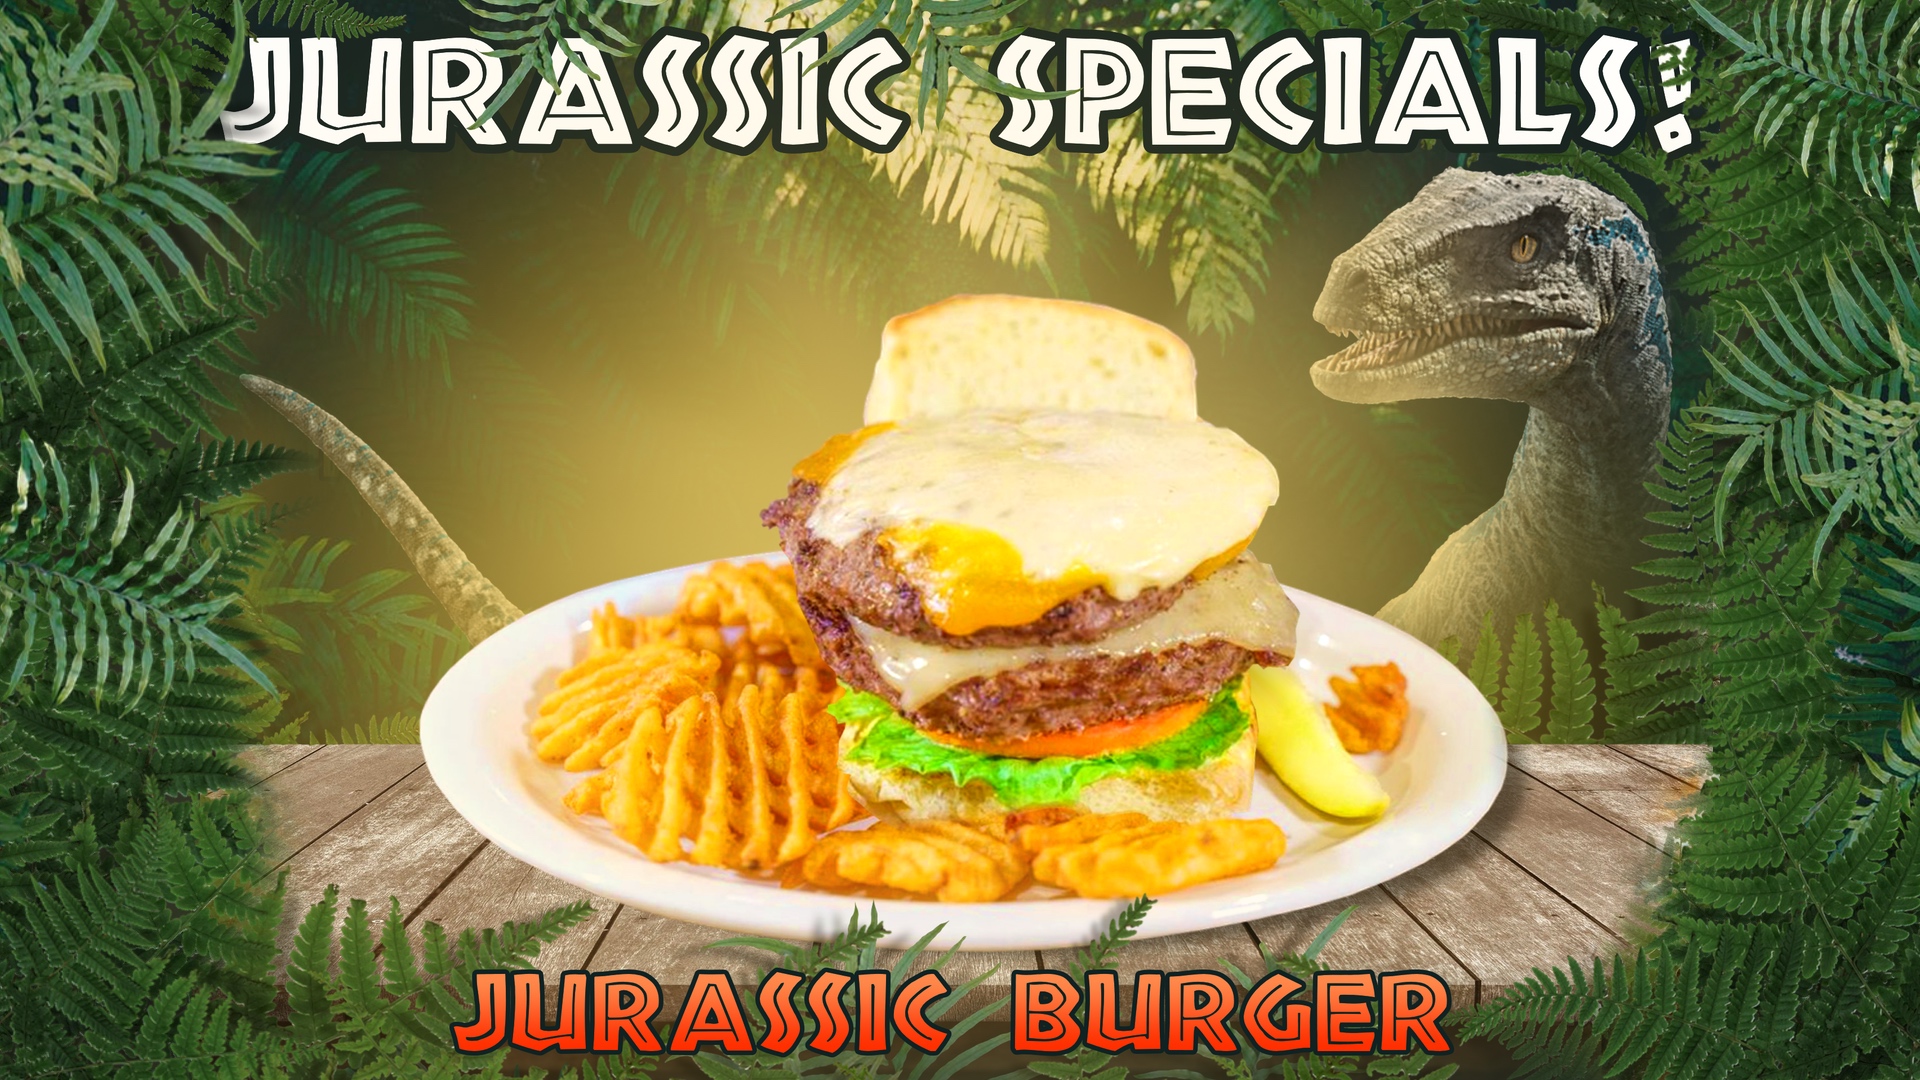 Jurassic Special Burger only image